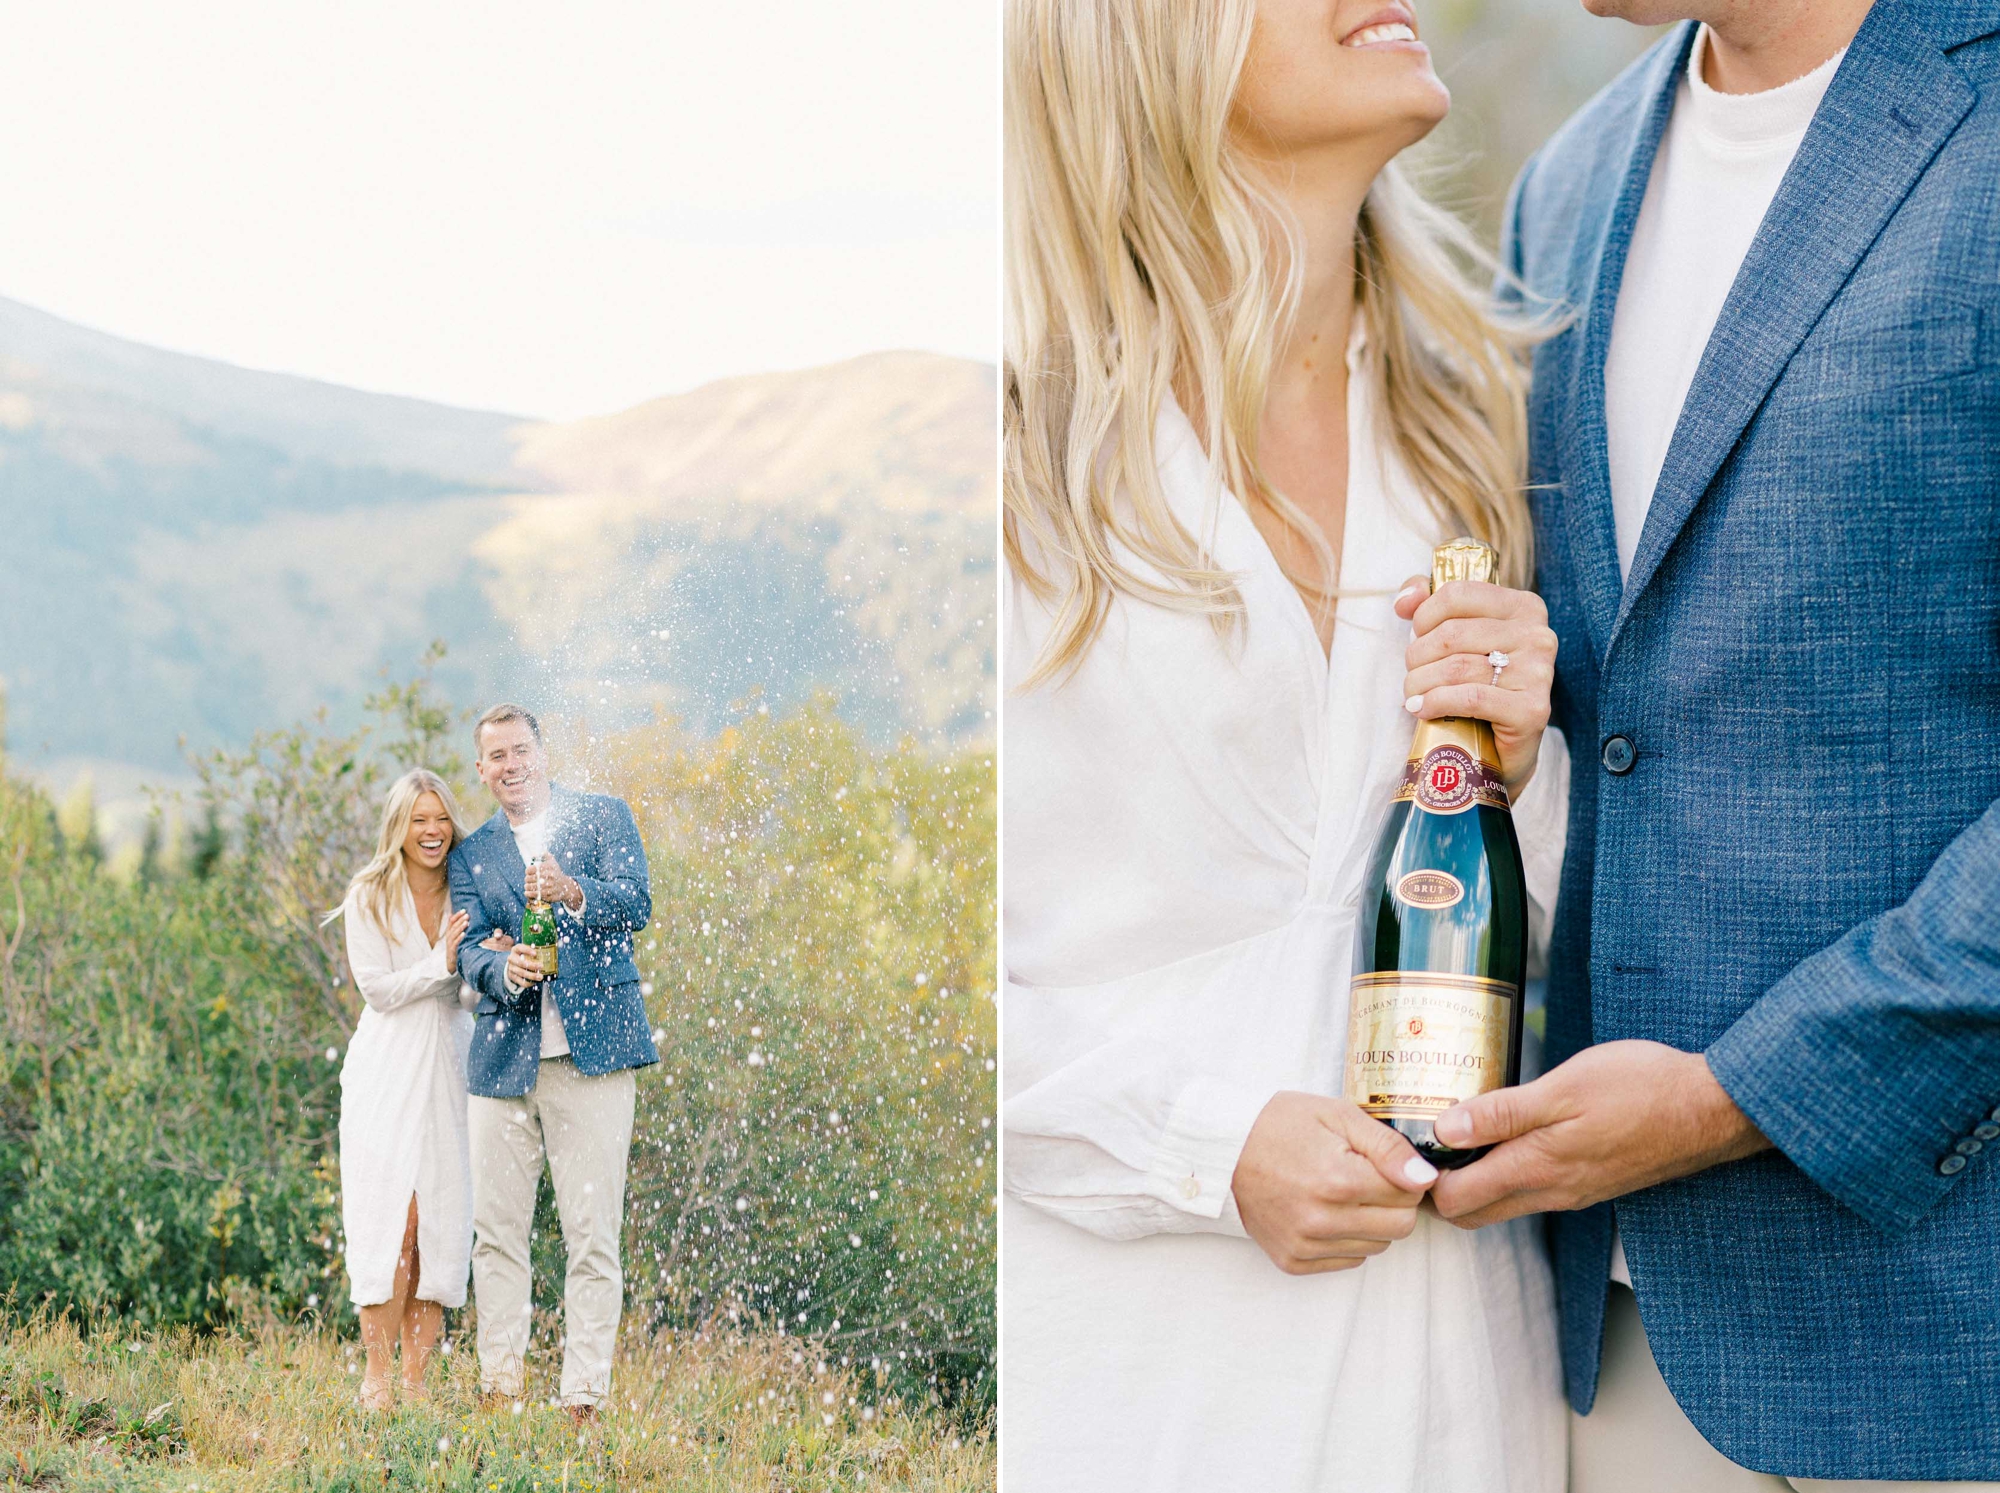 Engagement photos of couple holding champagne bottle, then opening and spraying the champagne in the Colorado mountains.